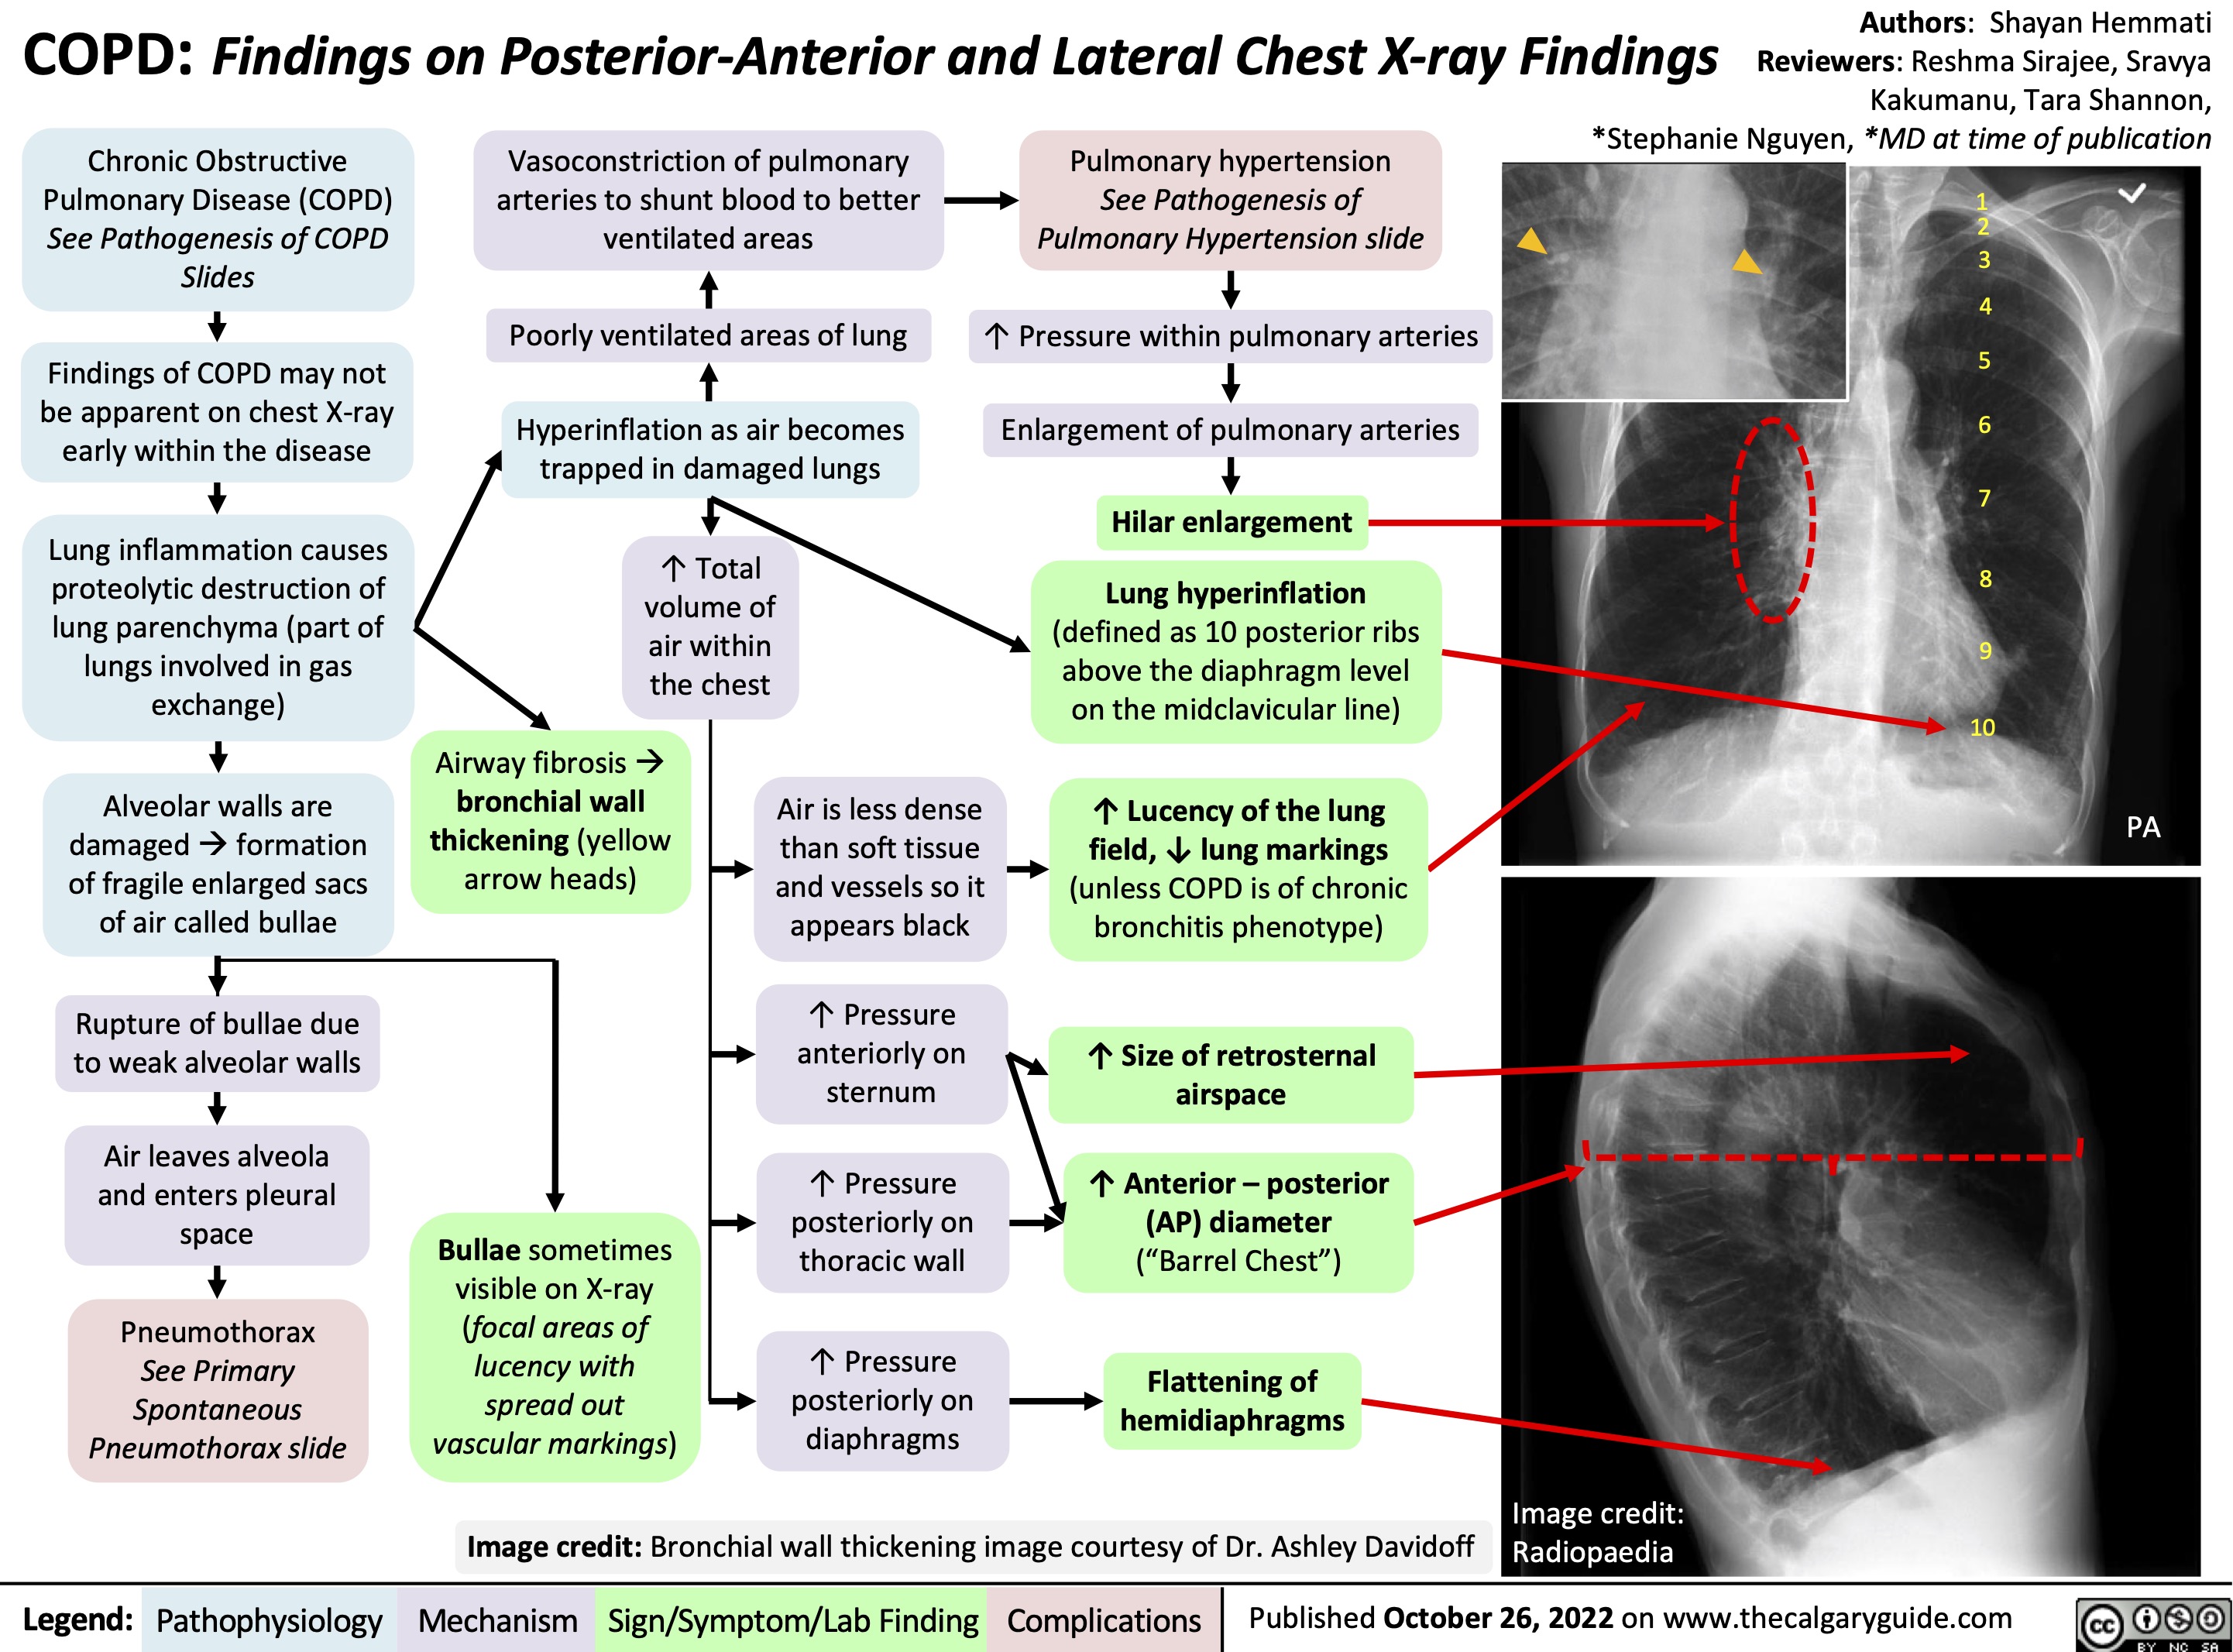 Authors: Shayan Hemmati COPD: Findings on Posterior-Anterior and Lateral Chest X-ray Findings Reviewers: Reshma Sirajee, Sravya Kakumanu, Tara Shannon, *Stephanie Nguyen, *MD at time of publication
   Chronic Obstructive Pulmonary Disease (COPD) See Pathogenesis of COPD Slides
Findings of COPD may not be apparent on chest X-ray early within the disease
Lung inflammation causes proteolytic destruction of lung parenchyma (part of lungs involved in gas exchange)
Alveolar walls are damagedàformation of fragile enlarged sacs of air called bullae
Rupture of bullae due to weak alveolar walls
Air leaves alveola and enters pleural space
Pneumothorax
See Primary Spontaneous Pneumothorax slide
Vasoconstriction of pulmonary arteries to shunt blood to better ventilated areas
Pulmonary hypertension
See Pathogenesis of Pulmonary Hypertension slide
↑ Pressure within pulmonary arteries
Enlargement of pulmonary arteries
Hilar enlargement Lung hyperinflation
(defined as 10 posterior ribs above the diaphragm level on the midclavicular line)
↑ Lucency of the lung
field, ↓ lung markings
(unless COPD is of chronic bronchitis phenotype)
↑ Size of retrosternal airspace
↑ Anterior – posterior (AP) diameter (“Barrel Chest”)
Flattening of hemidiaphragms
12 3 4
5 6
7
8
9 10
    Poorly ventilated areas of lung
Hyperinflation as air becomes trapped in damaged lungs
↑ Total volume of air within the chest
                Airway fibrosisà bronchial wall thickening (yellow arrow heads)
Air is less dense than soft tissue and vessels so it appears black
↑ Pressure anteriorly on sternum
↑ Pressure posteriorly on thoracic wall
↑ Pressure posteriorly on diaphragms
PA
                Bullae sometimes visible on X-ray (focal areas of lucency with spread out vascular markings)
     Image credit: Bronchial wall thickening image courtesy of Dr. Ashley Davidoff
Image credit: Radiopaedia
 Legend:
 Pathophysiology
Mechanism
Sign/Symptom/Lab Finding
 Complications
Published October 26, 2022 on www.thecalgaryguide.com
    